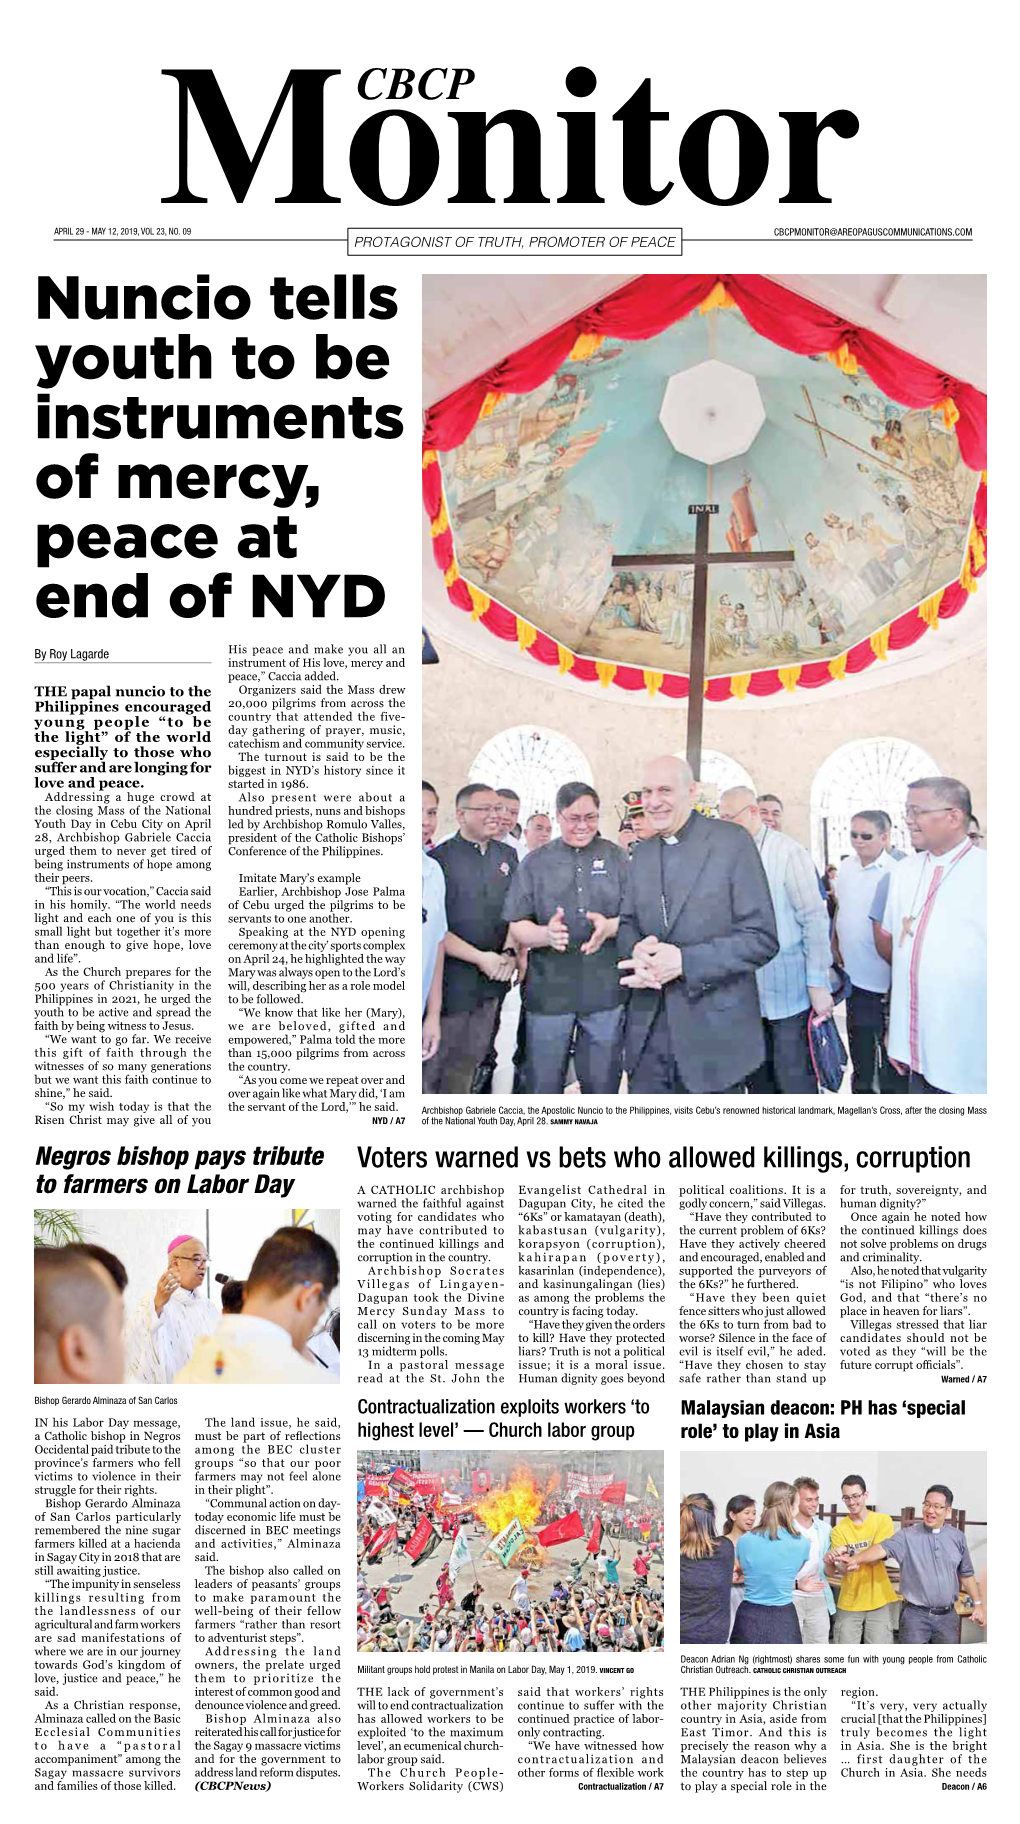 Nuncio Tells Youth to Be Instruments of Mercy, Peace at End of NYD